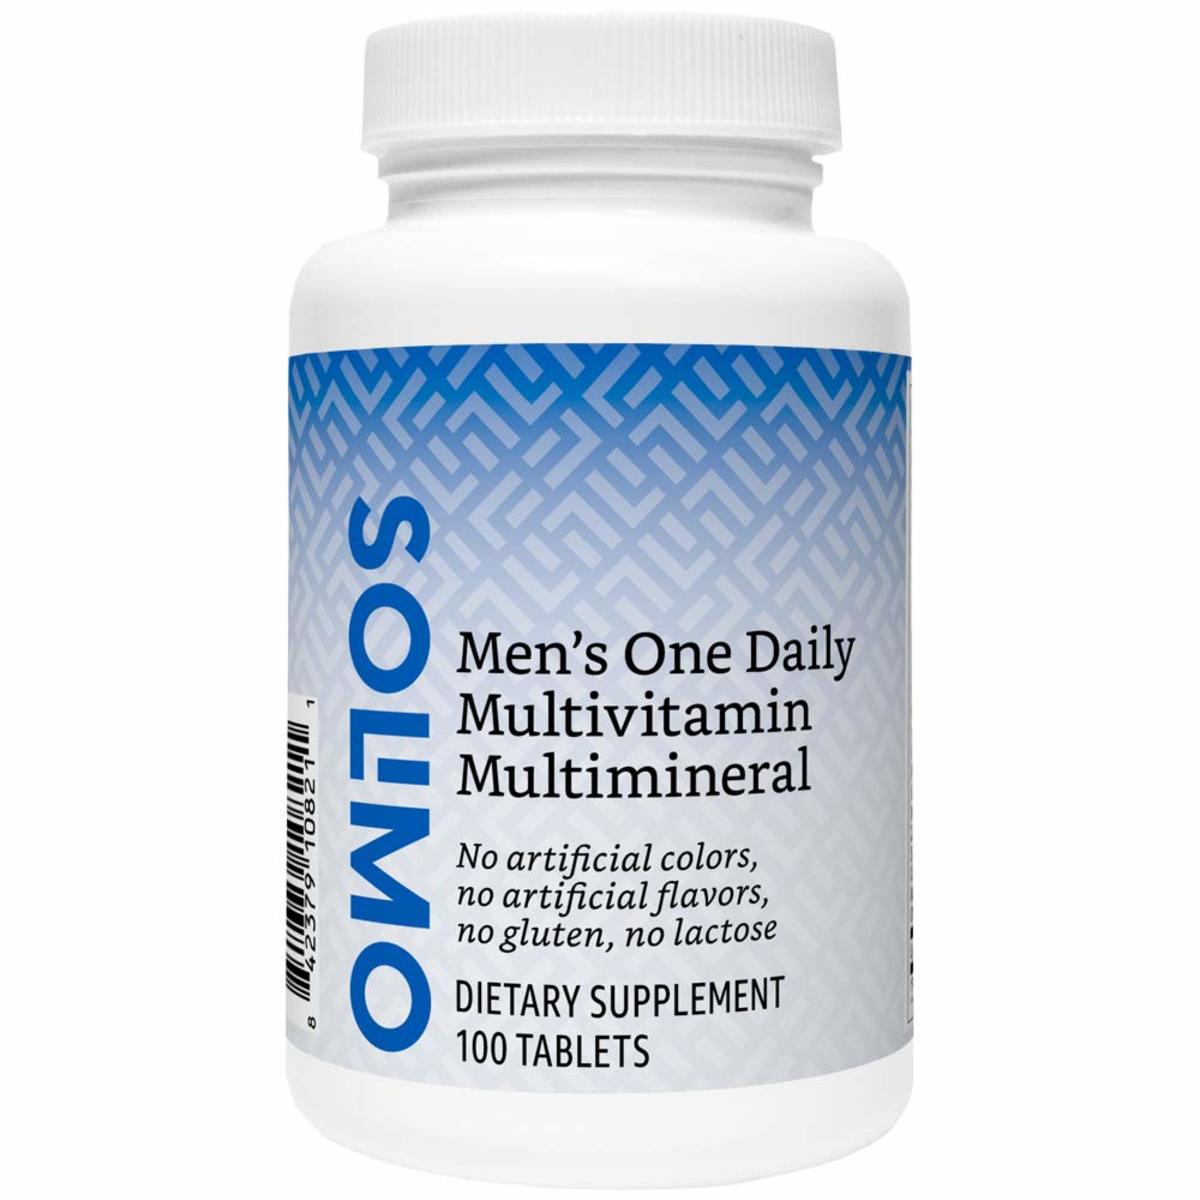 Solimo Men's One Daily Multivitamin Multimineral